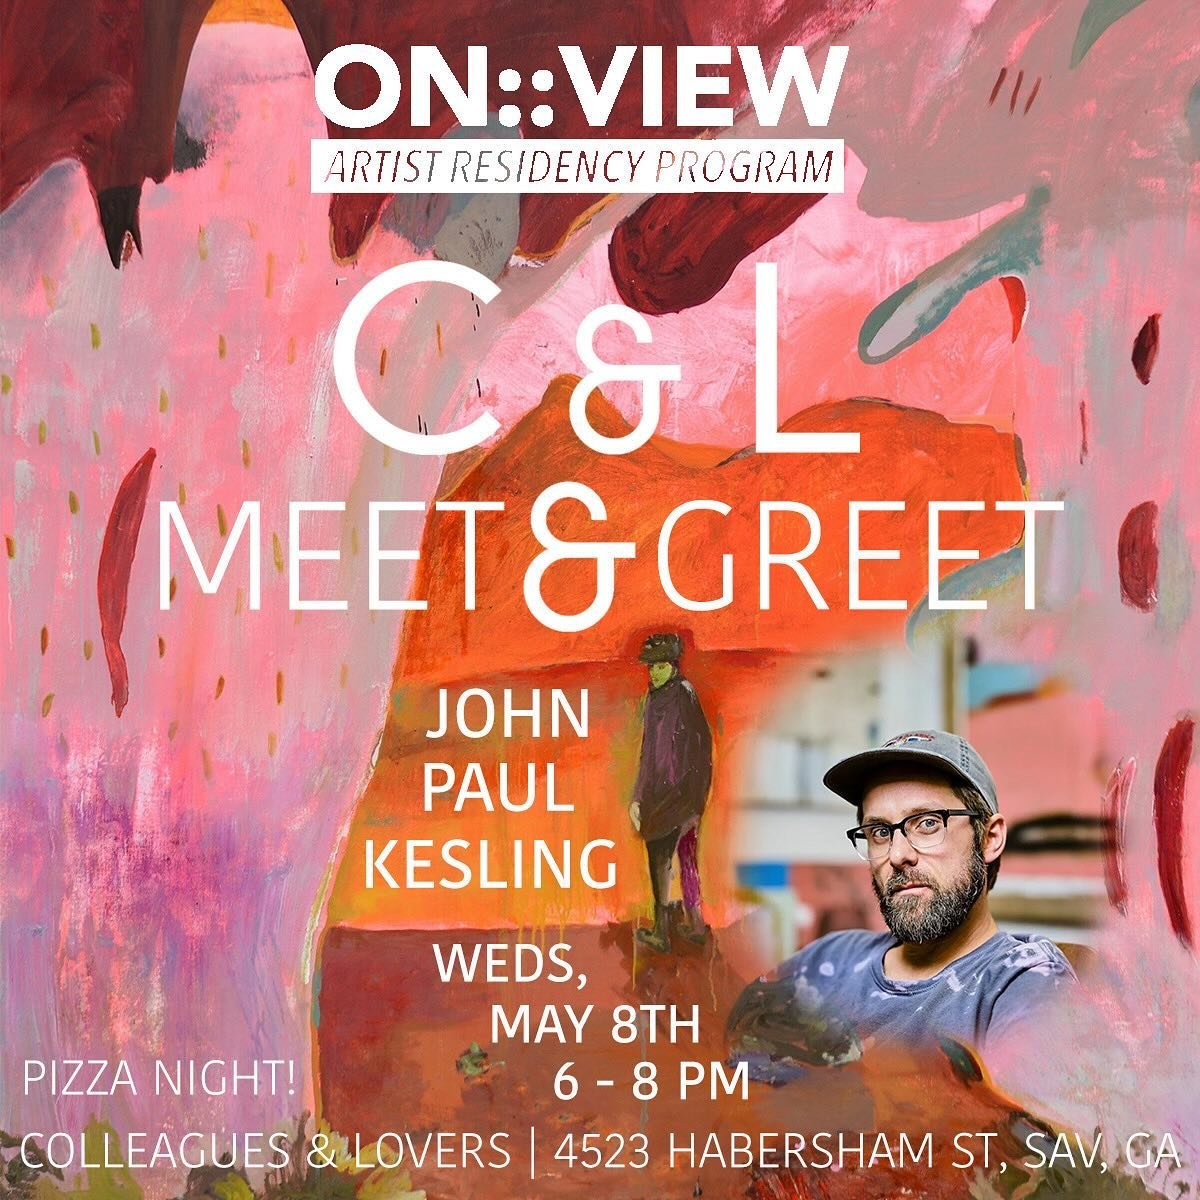 TONIGHT! Join us for a Meet &amp; Greet with May @onviewresidency Artist @johnpaulkesling !! 6-8 PM @colleagues_and_lovers 🍕🍷

John Paul Kesling (b. 1980, USA) was born and raised in Northeastern KY in the foothills of the Appalachian Mountains. He